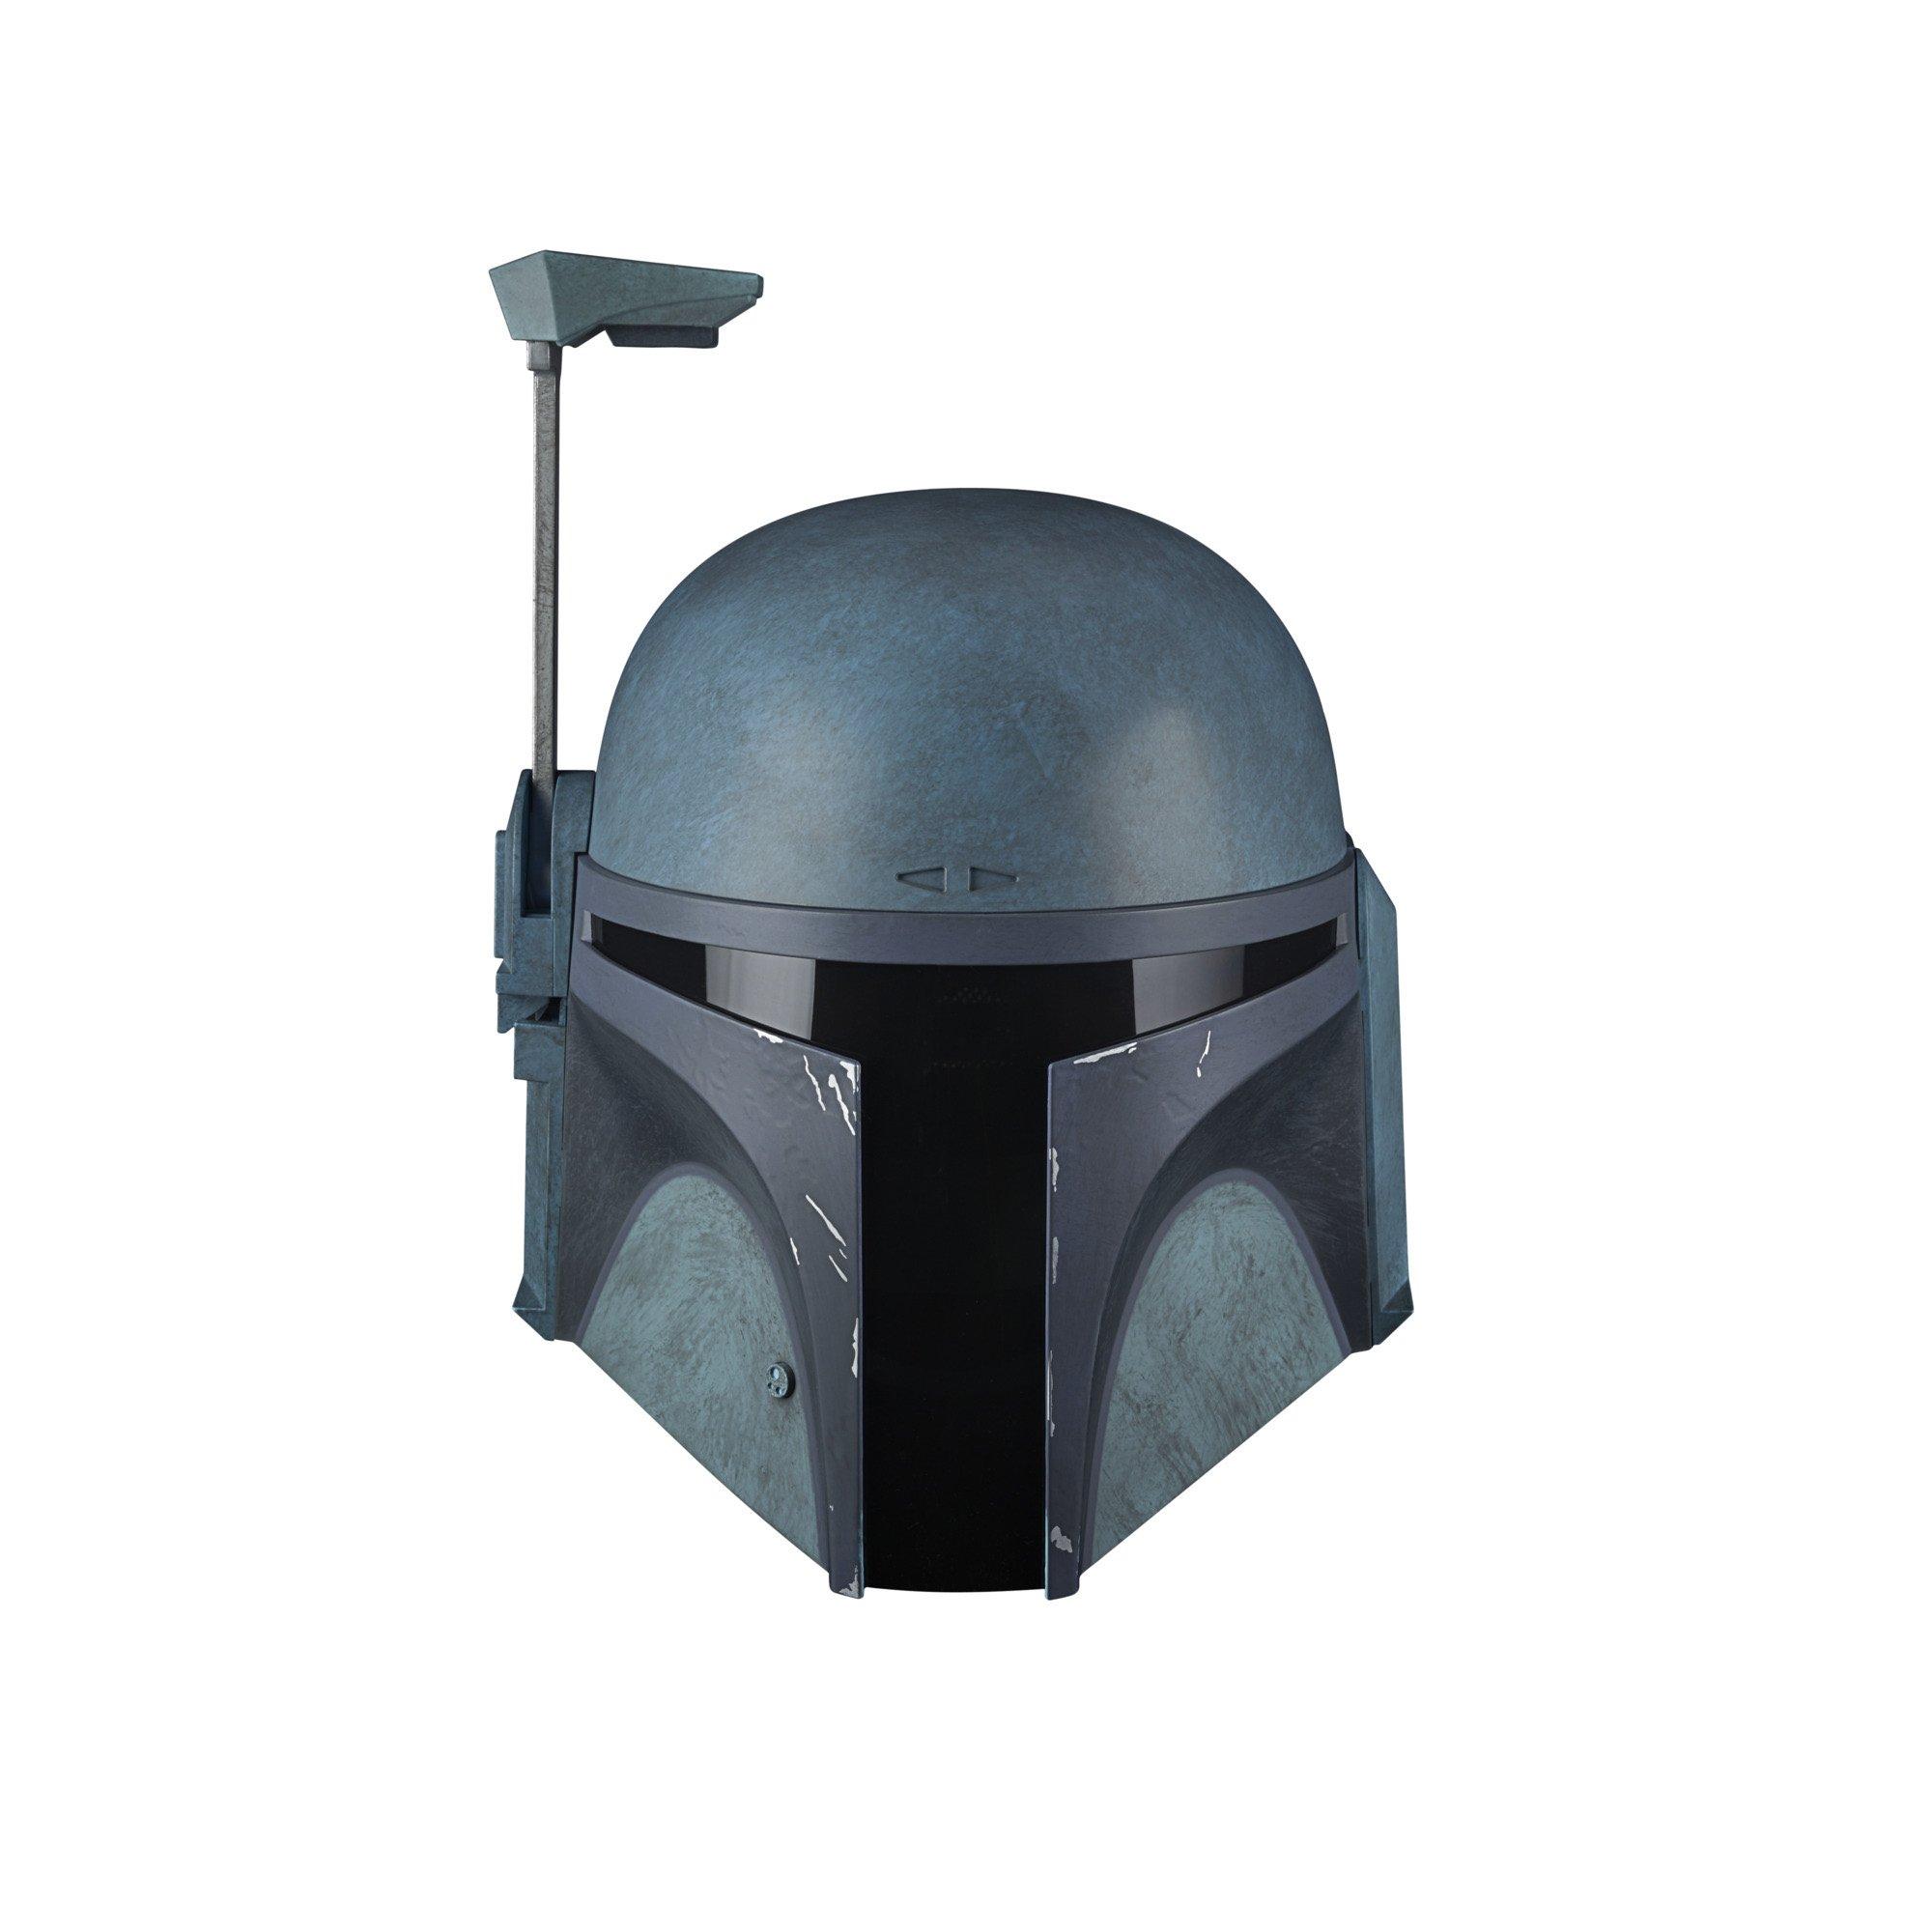 STAR WARS The Black Series The Mandalorian Premium Electronic Helmet  Roleplay Collectible, Toys for Kids Ages 14 and Up